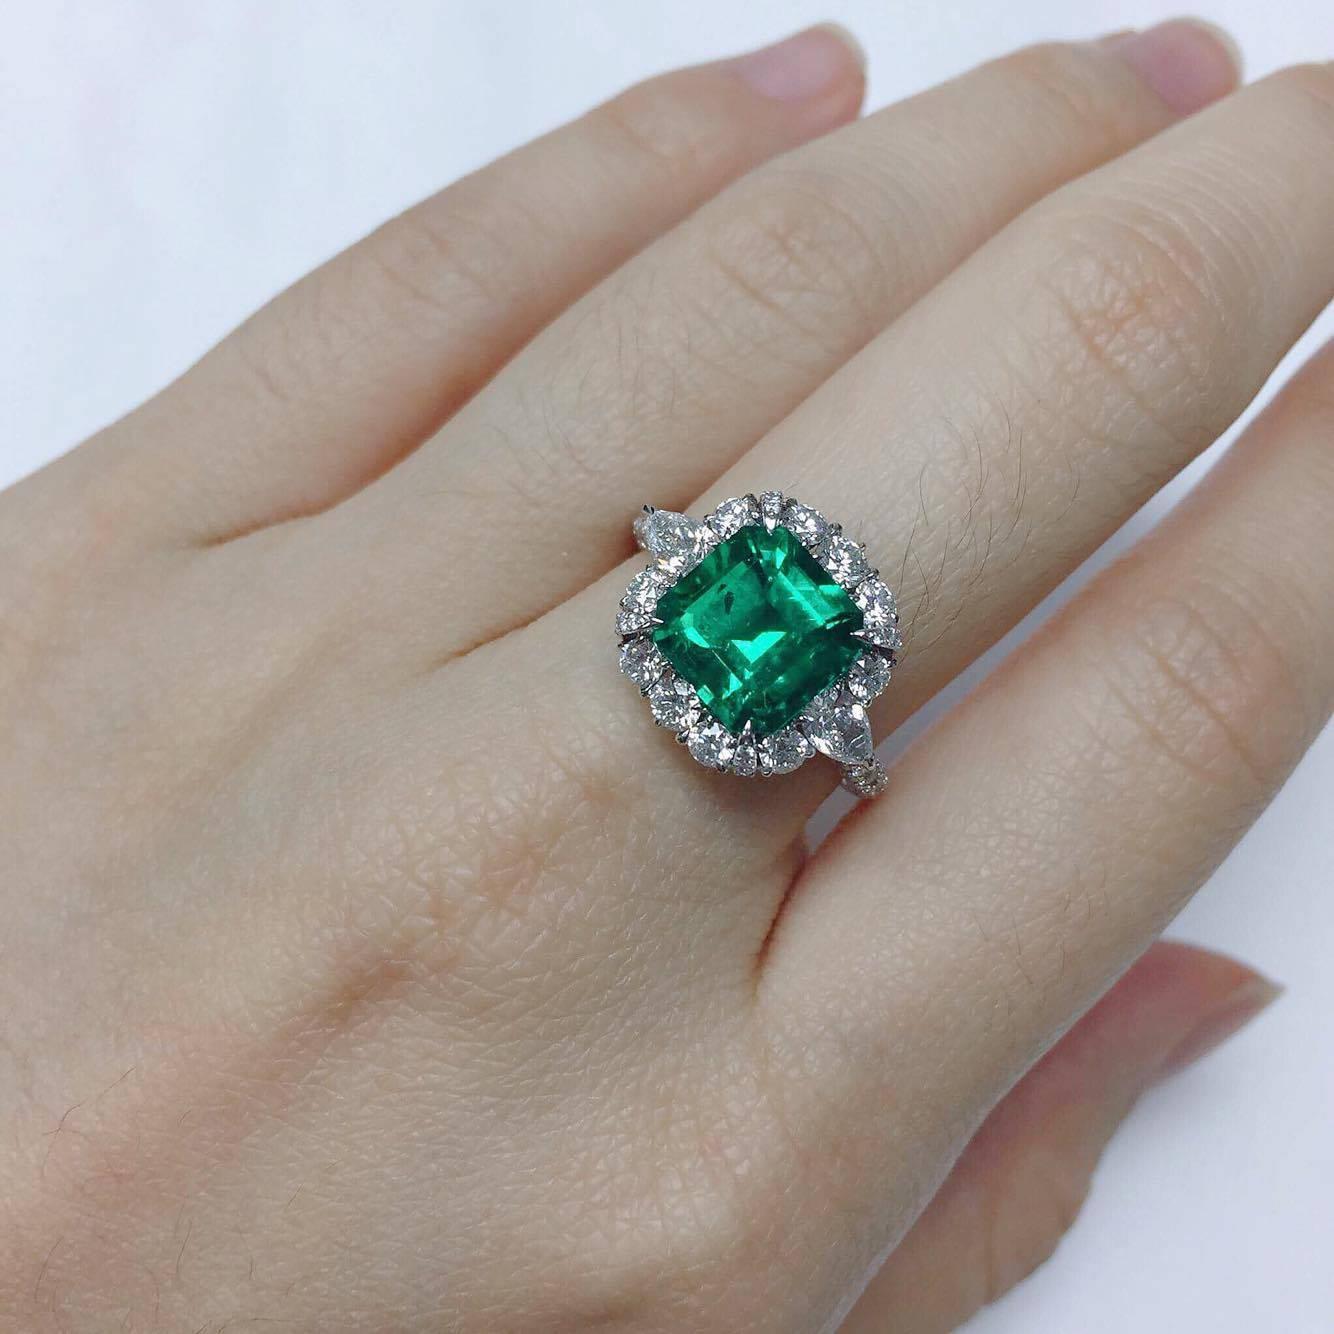 Ring in 18kt white gold set with one octagonal cut Colombian Emerald intense green (2.81 carat), 2 pear-shaped diamonds (0.37 carats), and 144 brilliant-cut diamonds (1.39 carats) E Color VVS clarity excellent cuts. 